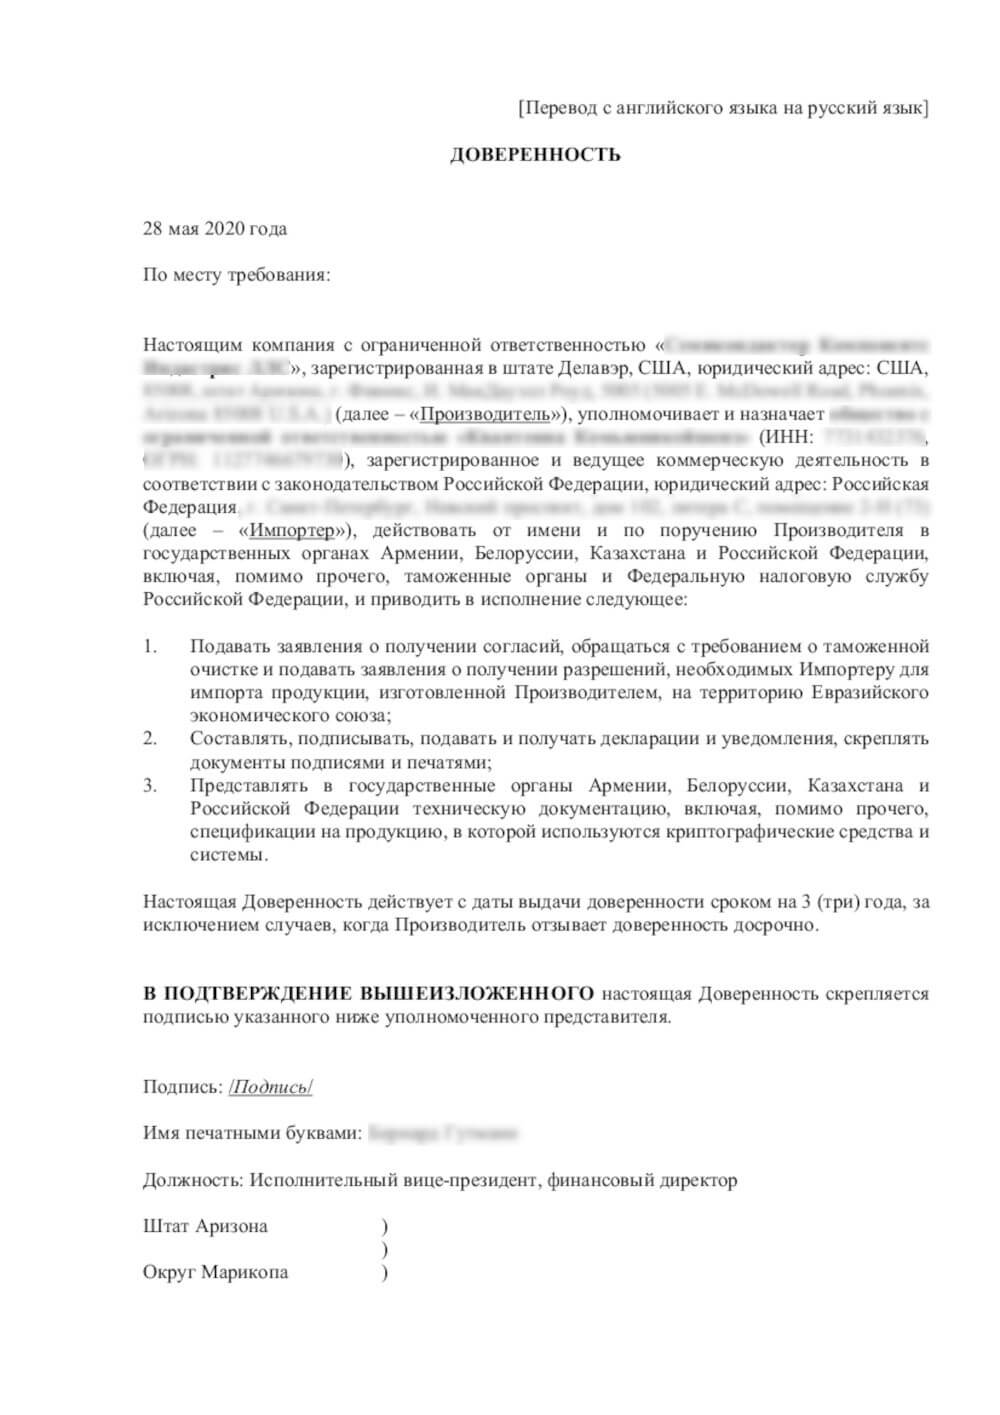 POA translated into Russian (page 1)